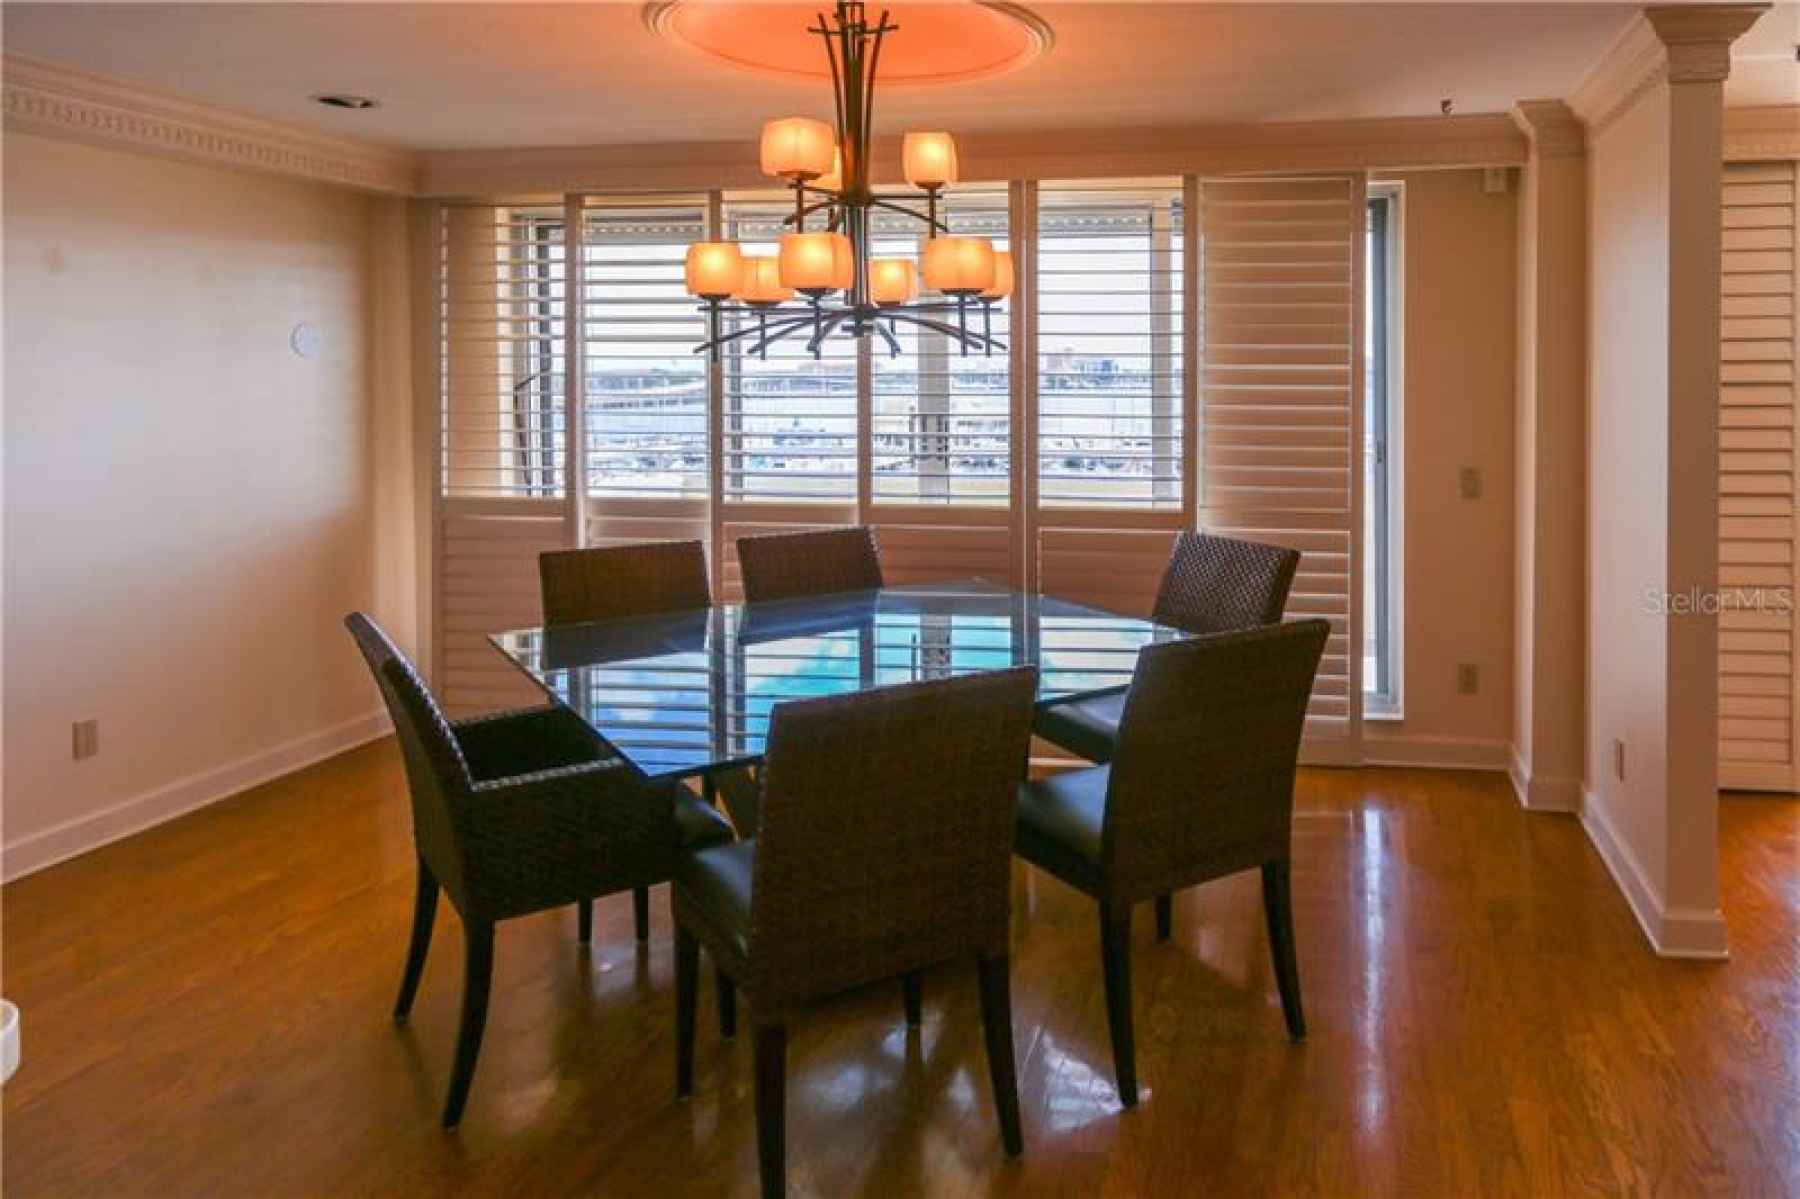 Dining Room with Beautiful Chandelier and access to back deck